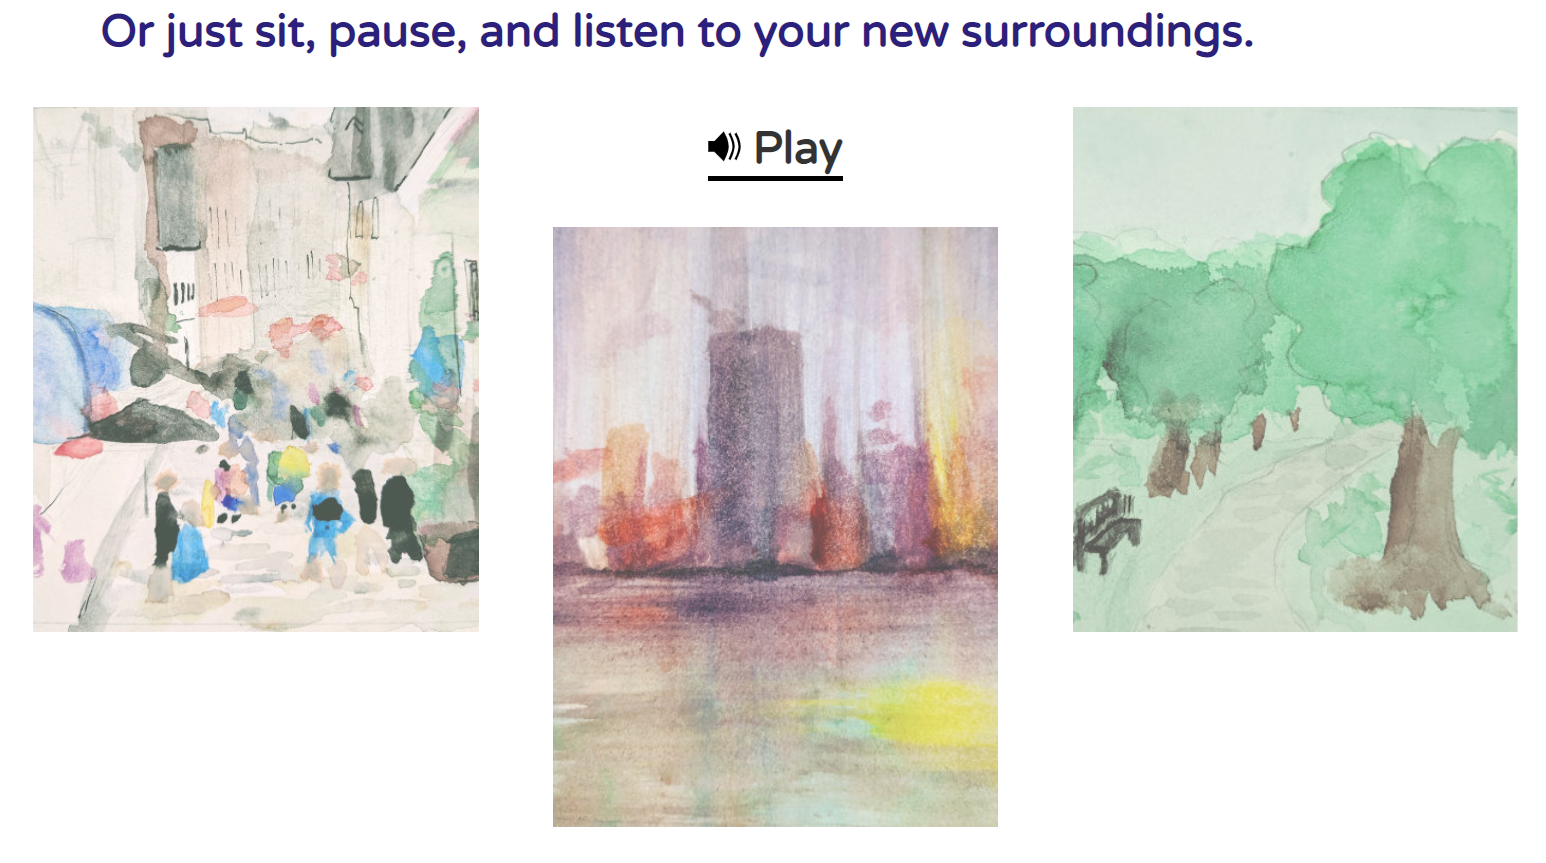 The text 'or sit, pause, and listen to your surroundings' and 3 watercolor paintings: one of a montreal city street, one of a city skyline in the rain, and one of a park in the summer.